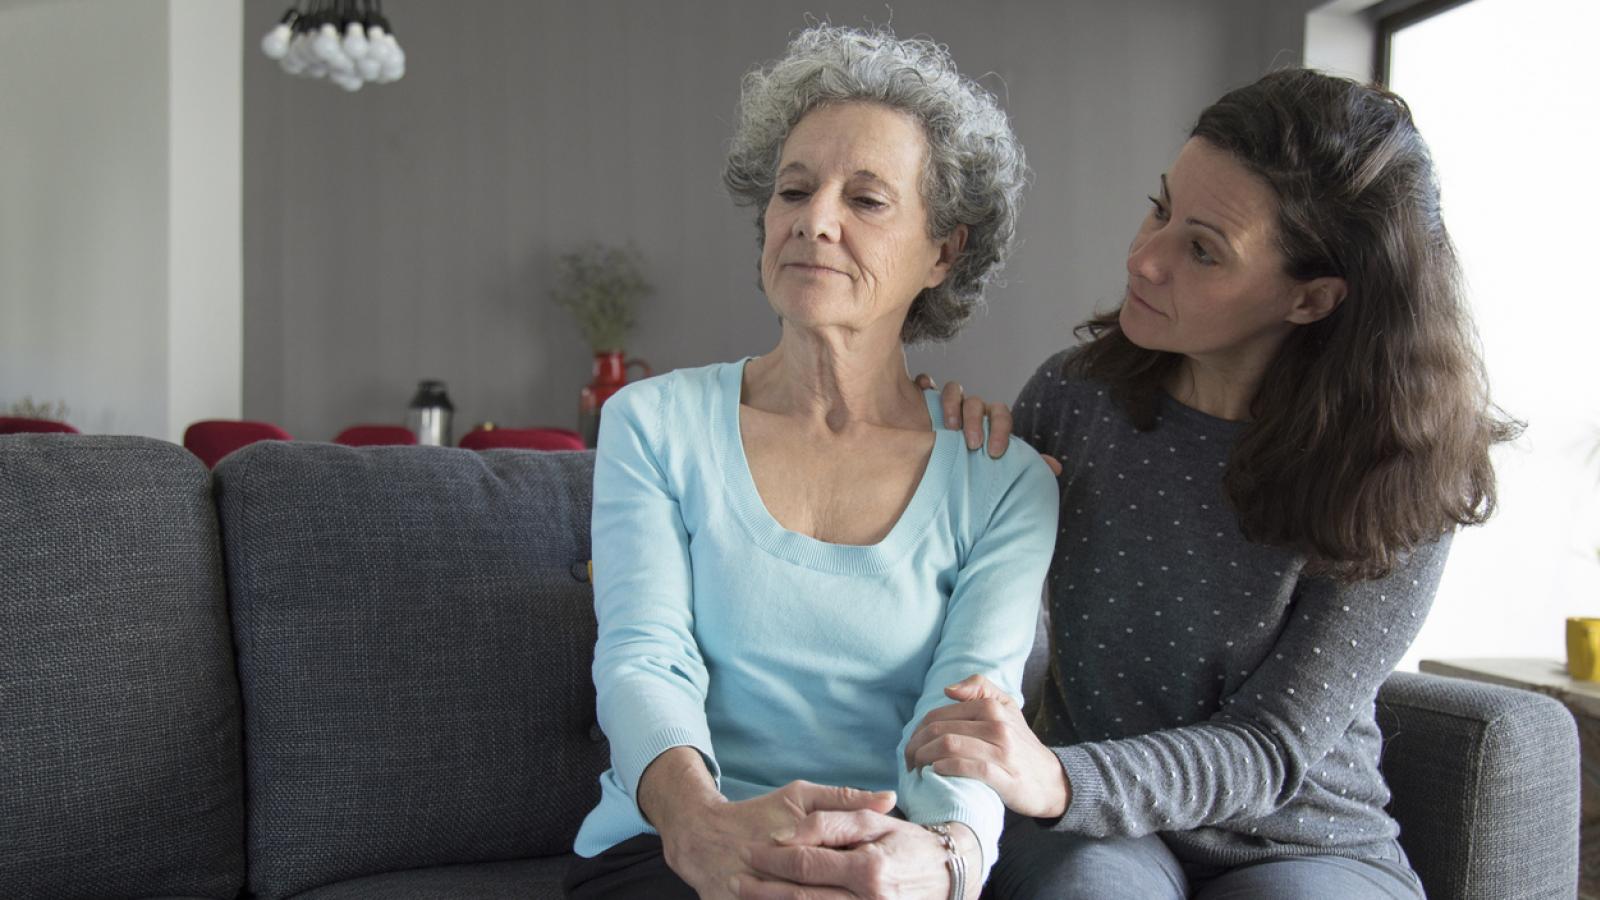 Younger woman consoling older woman on couch